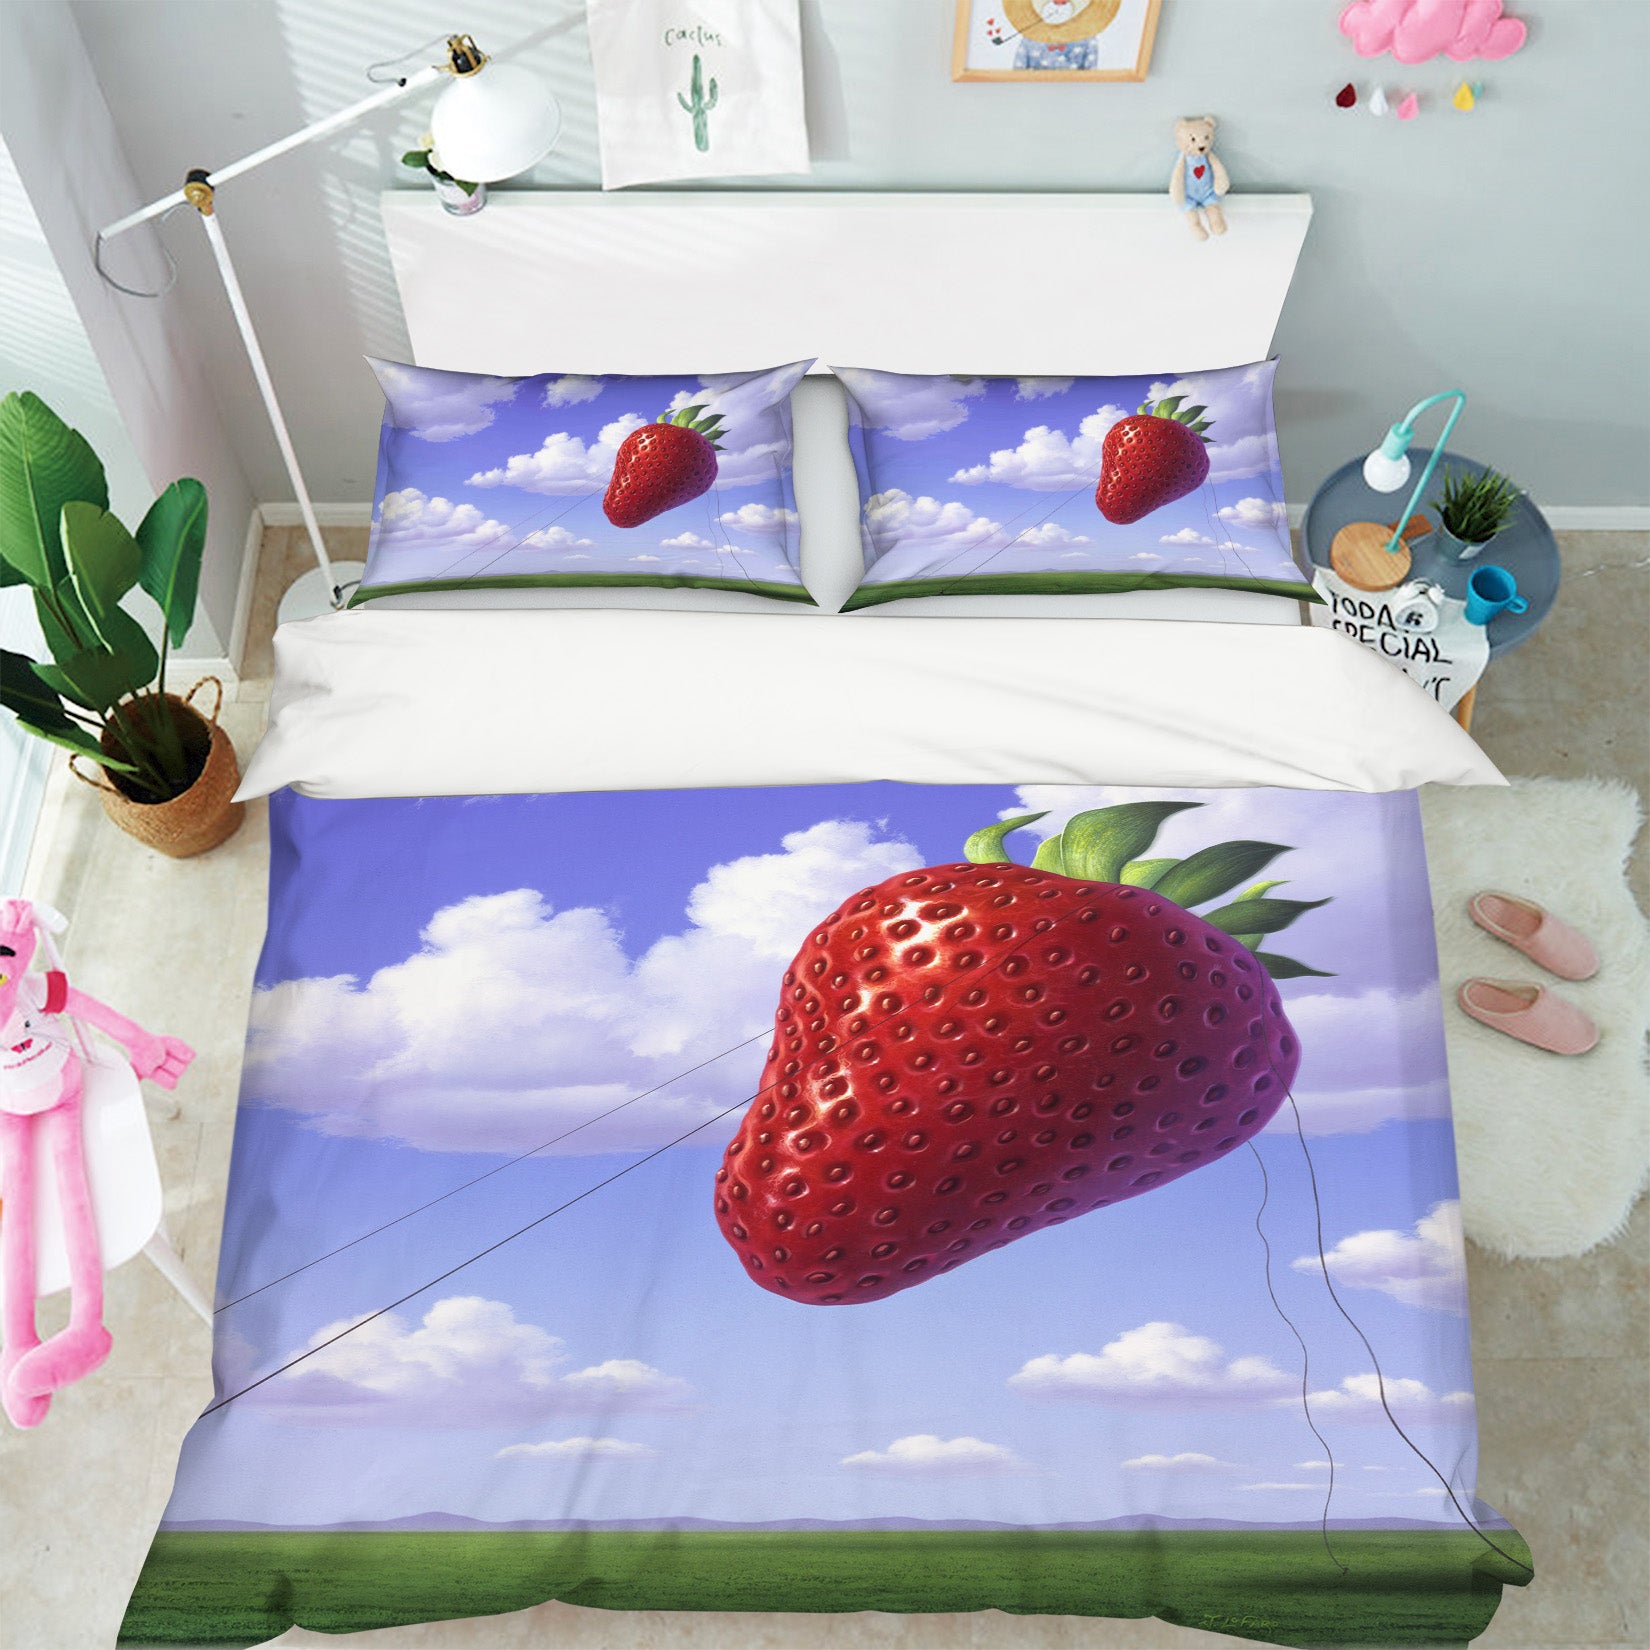 3D Strawberry Field 86015 Jerry LoFaro bedding Bed Pillowcases Quilt